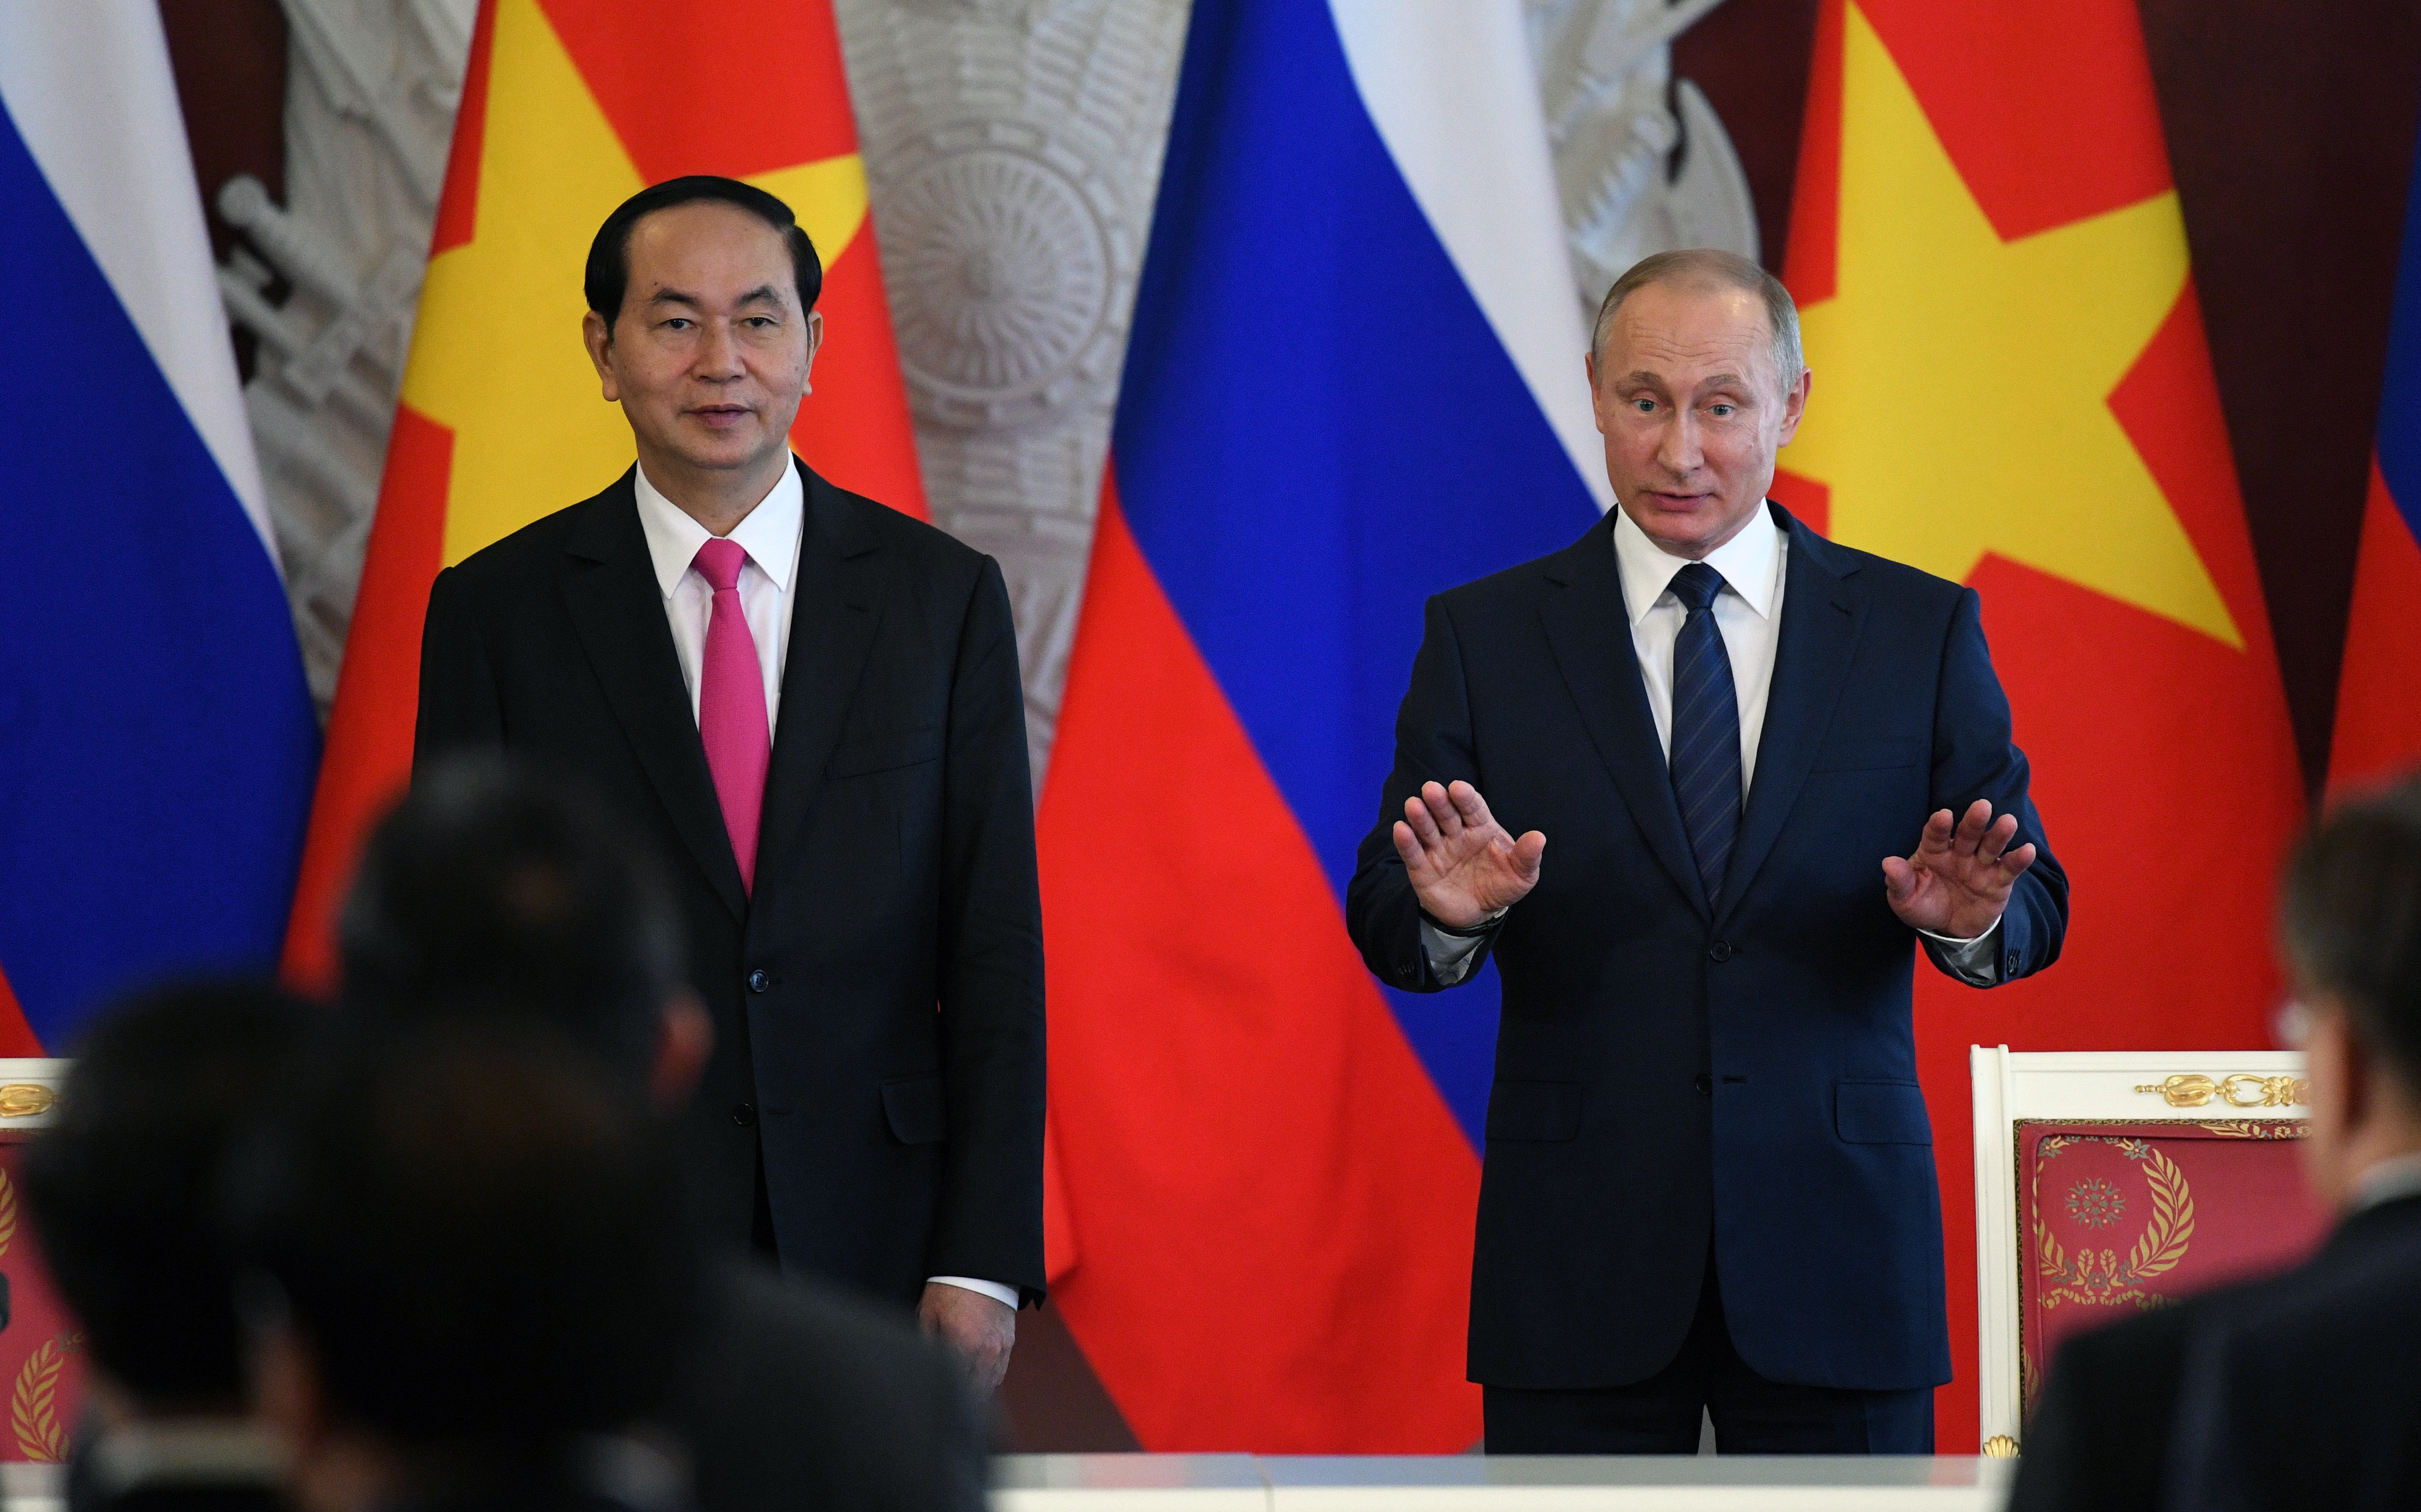 Russian President Vladimir Putin (right) and his Vietnamese counterpart Tran Dai Quang give a press conference at the Kremlin in Moscow on June 29, 2017. Trade between the two countries reached US$5.2 billion last year. Photo: AFP